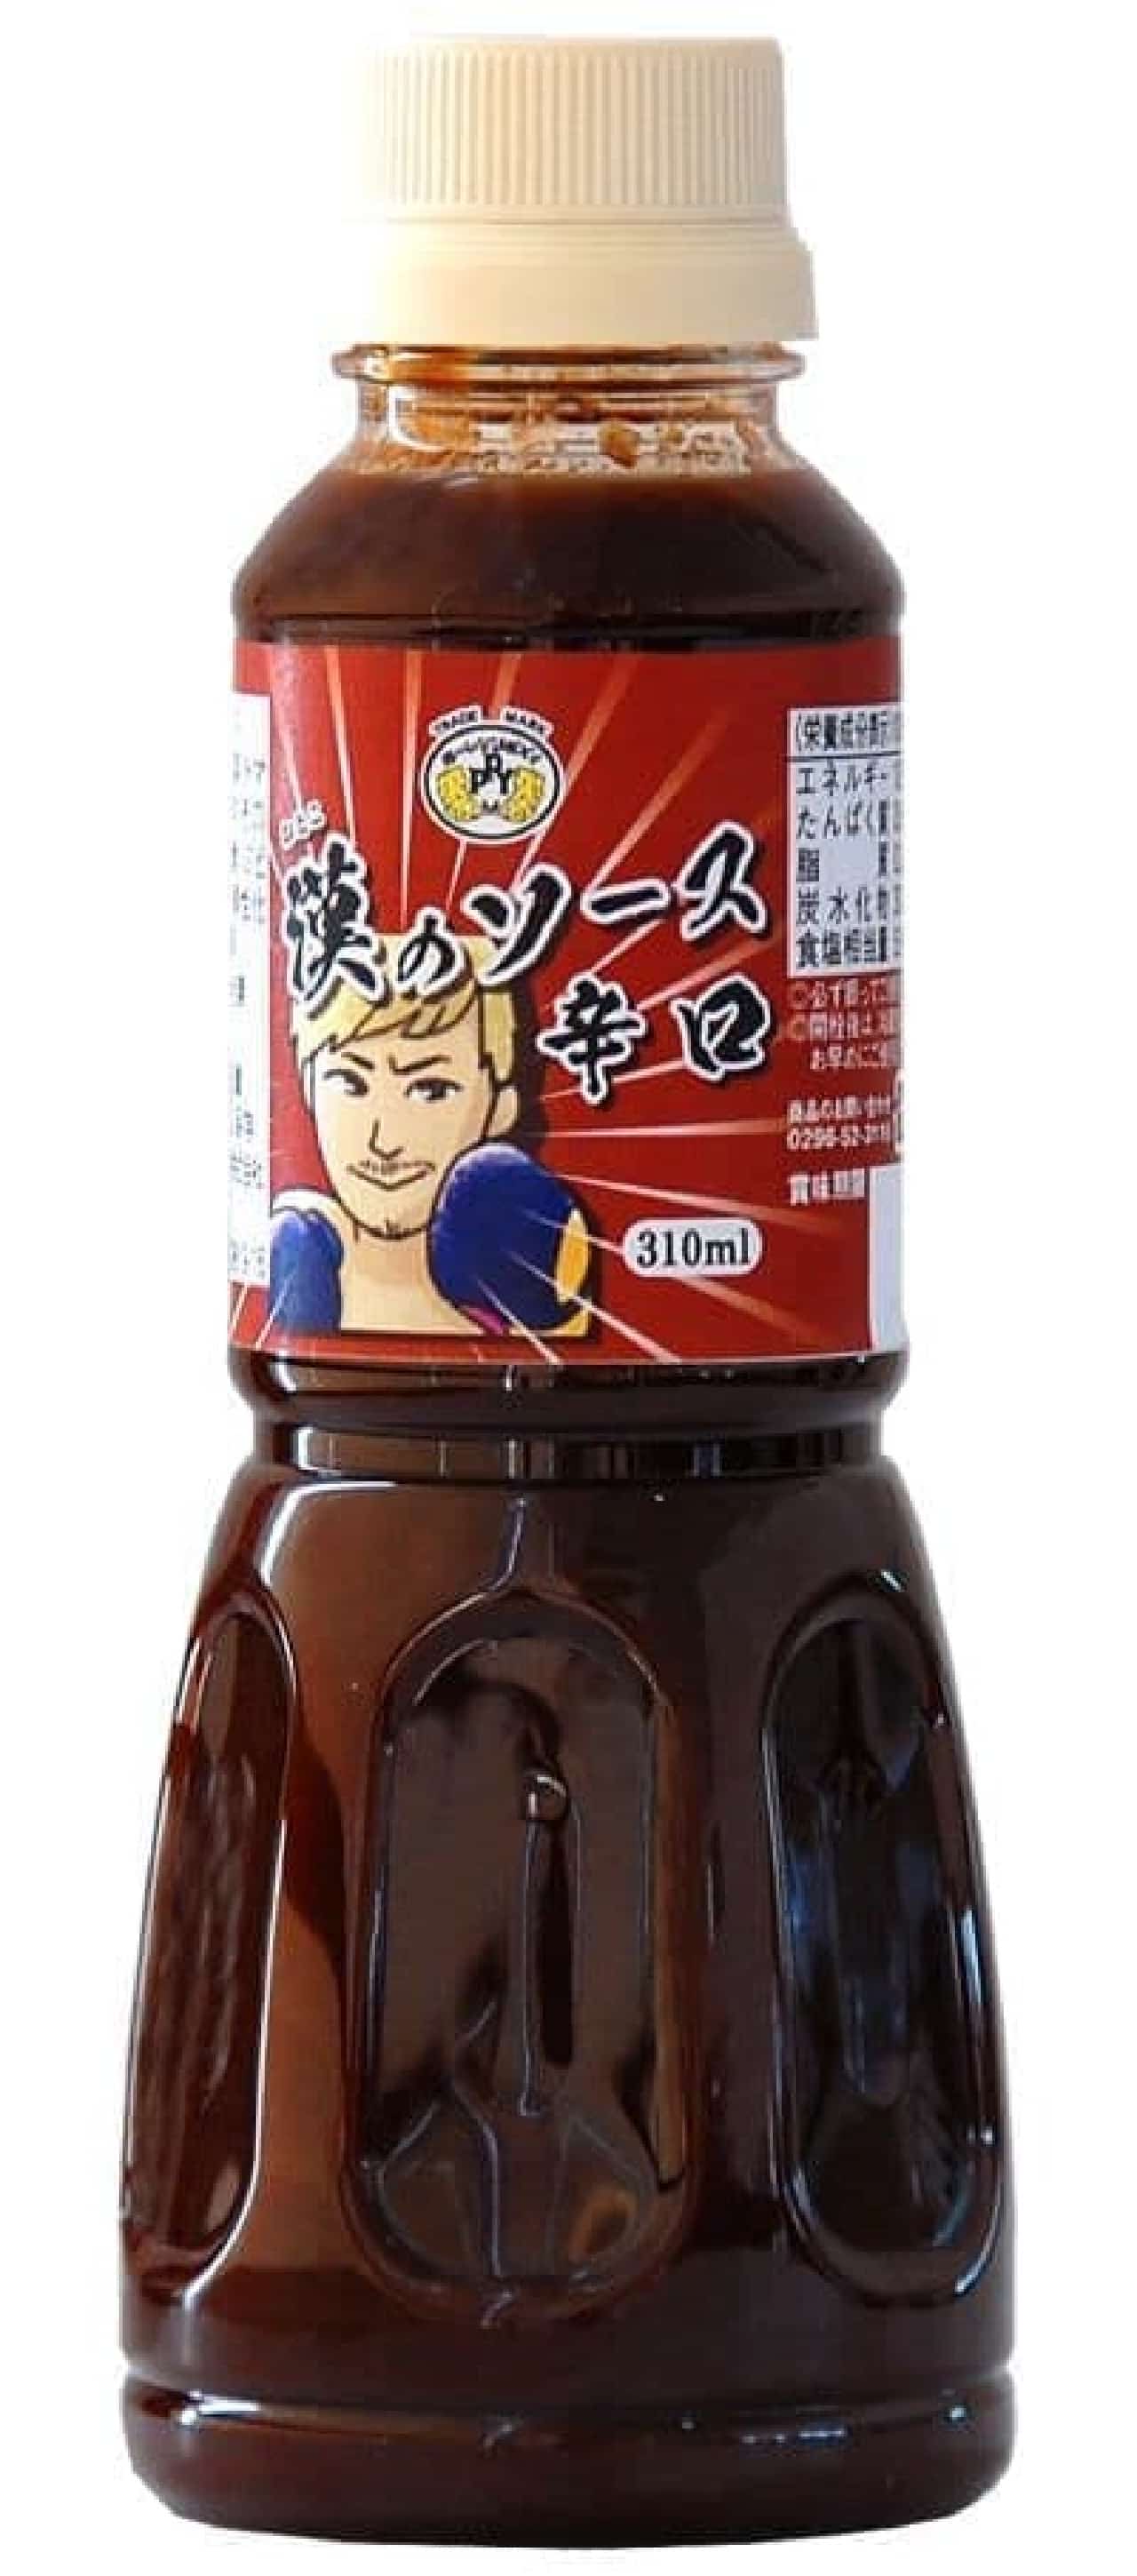 "Han sauce dry" is a sauce that has both "punchy" spiciness and deliciousness.